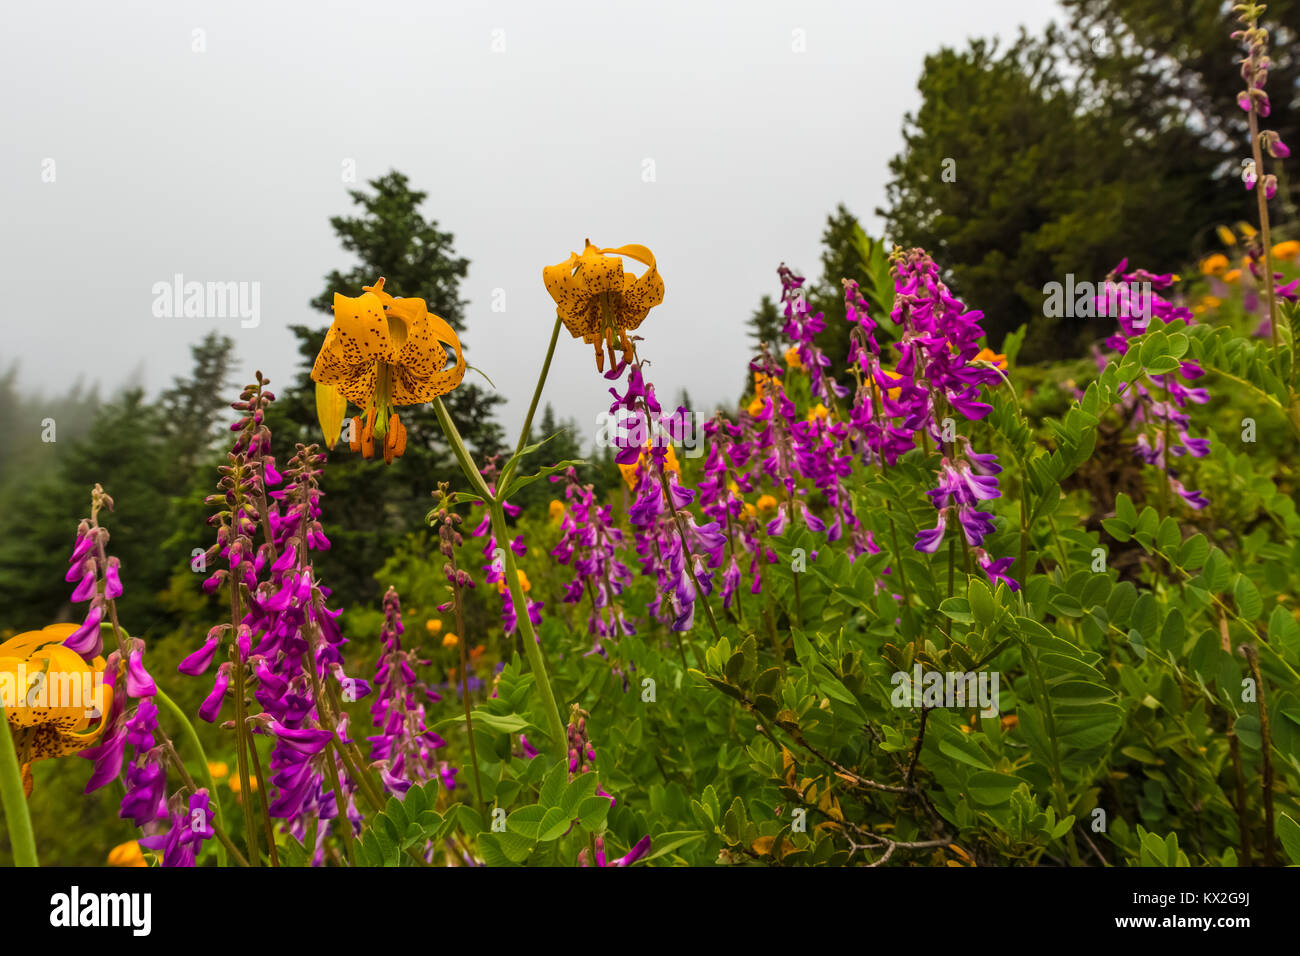 Columbia Tiger Lily, Lilium columbianum, and Western Sweetbroom, Hedysarum occidentale, along trail to Mount Townsend in the Buckhorn Wilderness, Olym Stock Photo